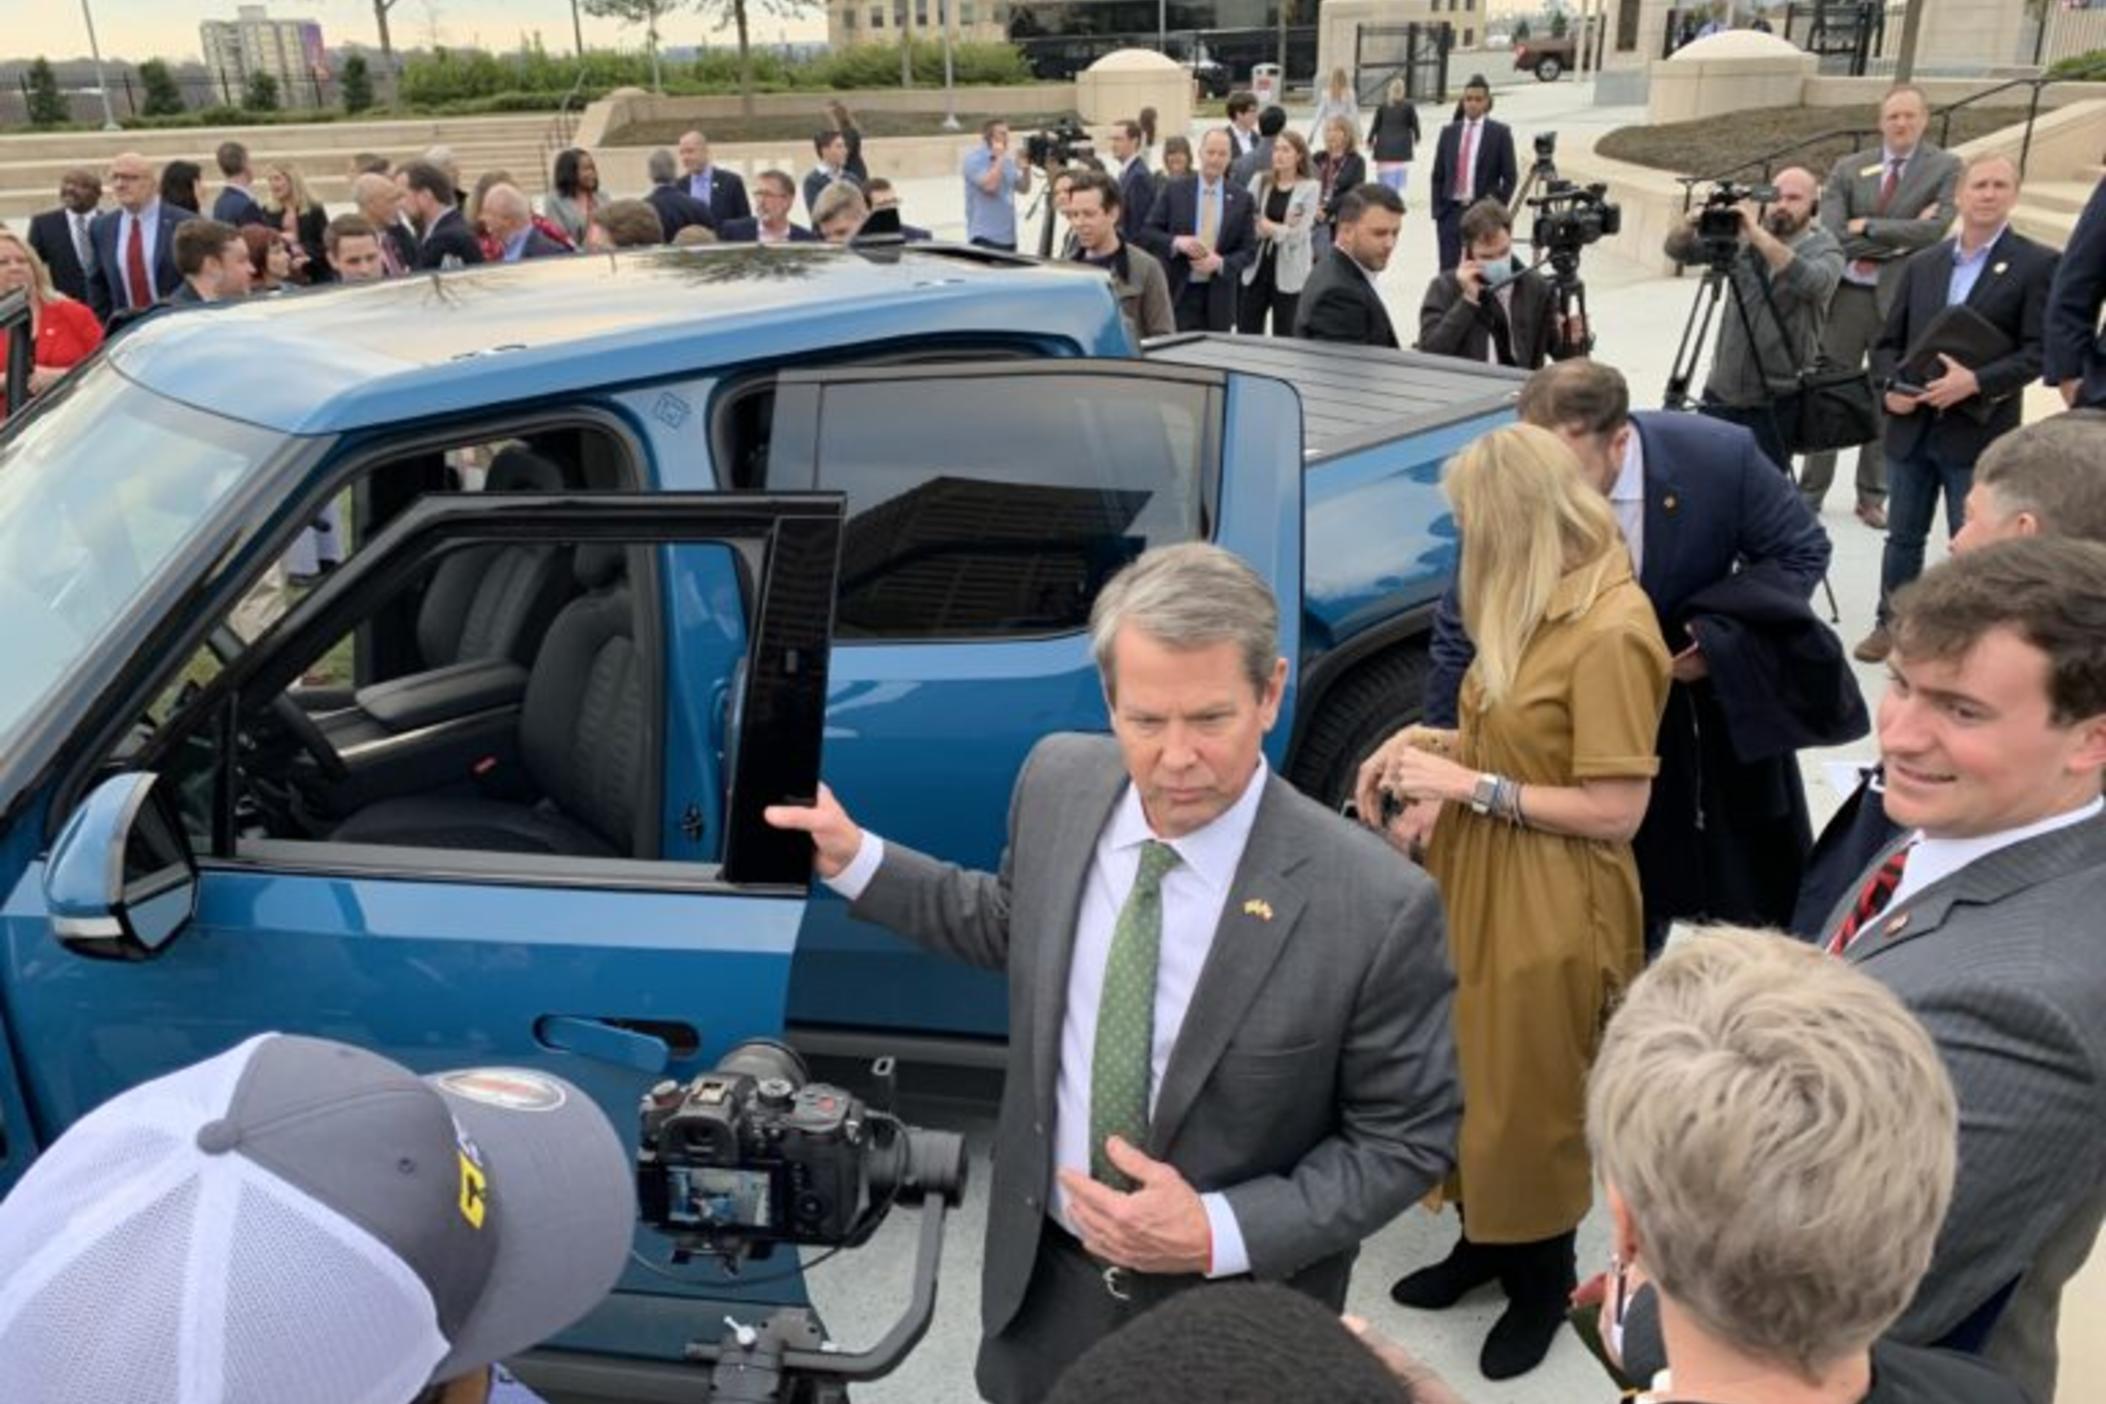  Gov. Brian Kemp steps out of a Rivian truck Thursday at a press event announcing the the electric vehicle maker will build a factory in Georgia. Jill Nolin/Georgia Recorder